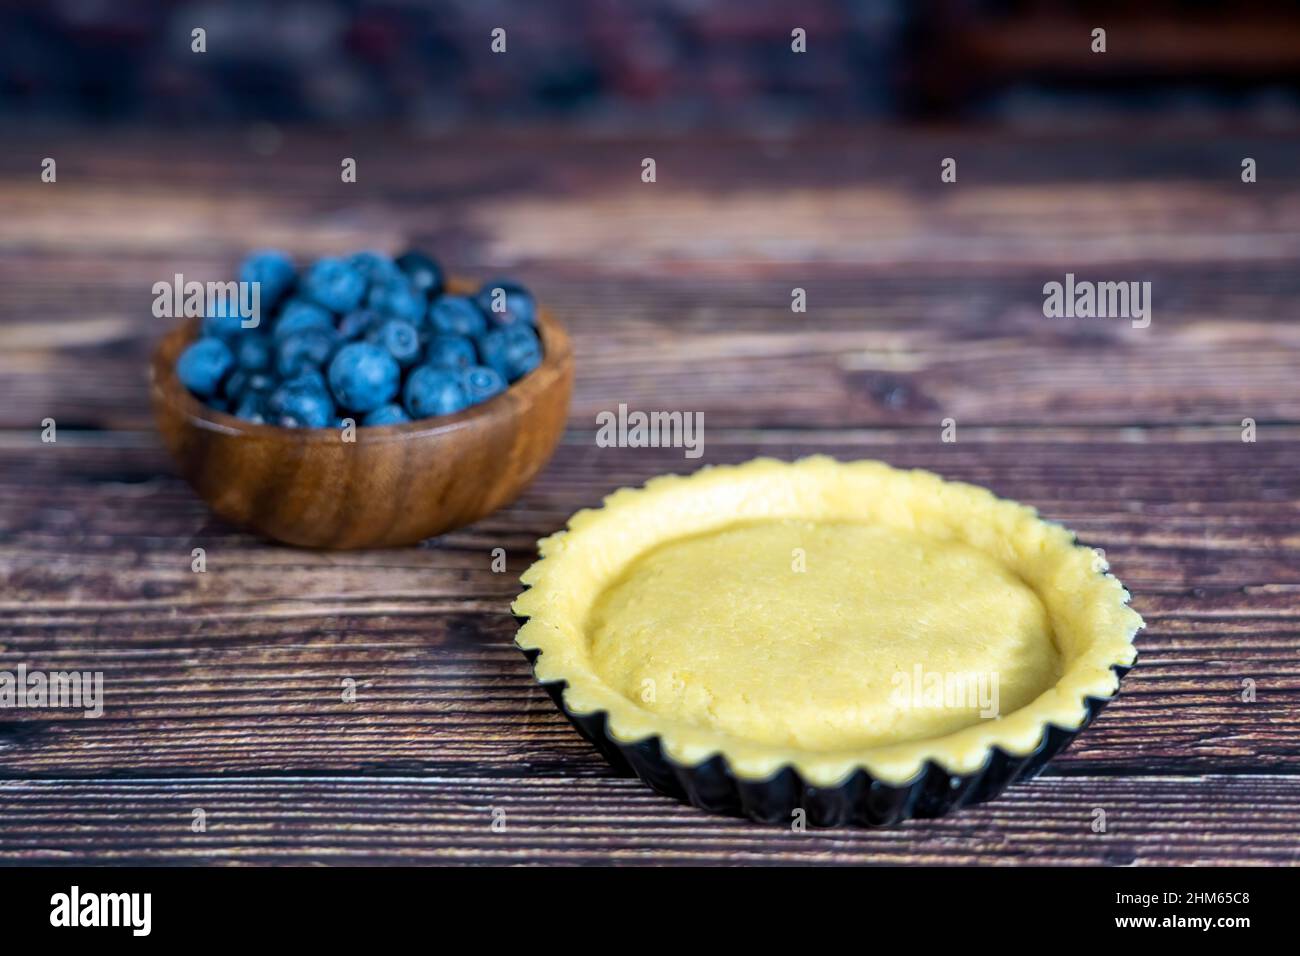 Delicious Blue berry tart or pie large  on wood table background. Stock Photo